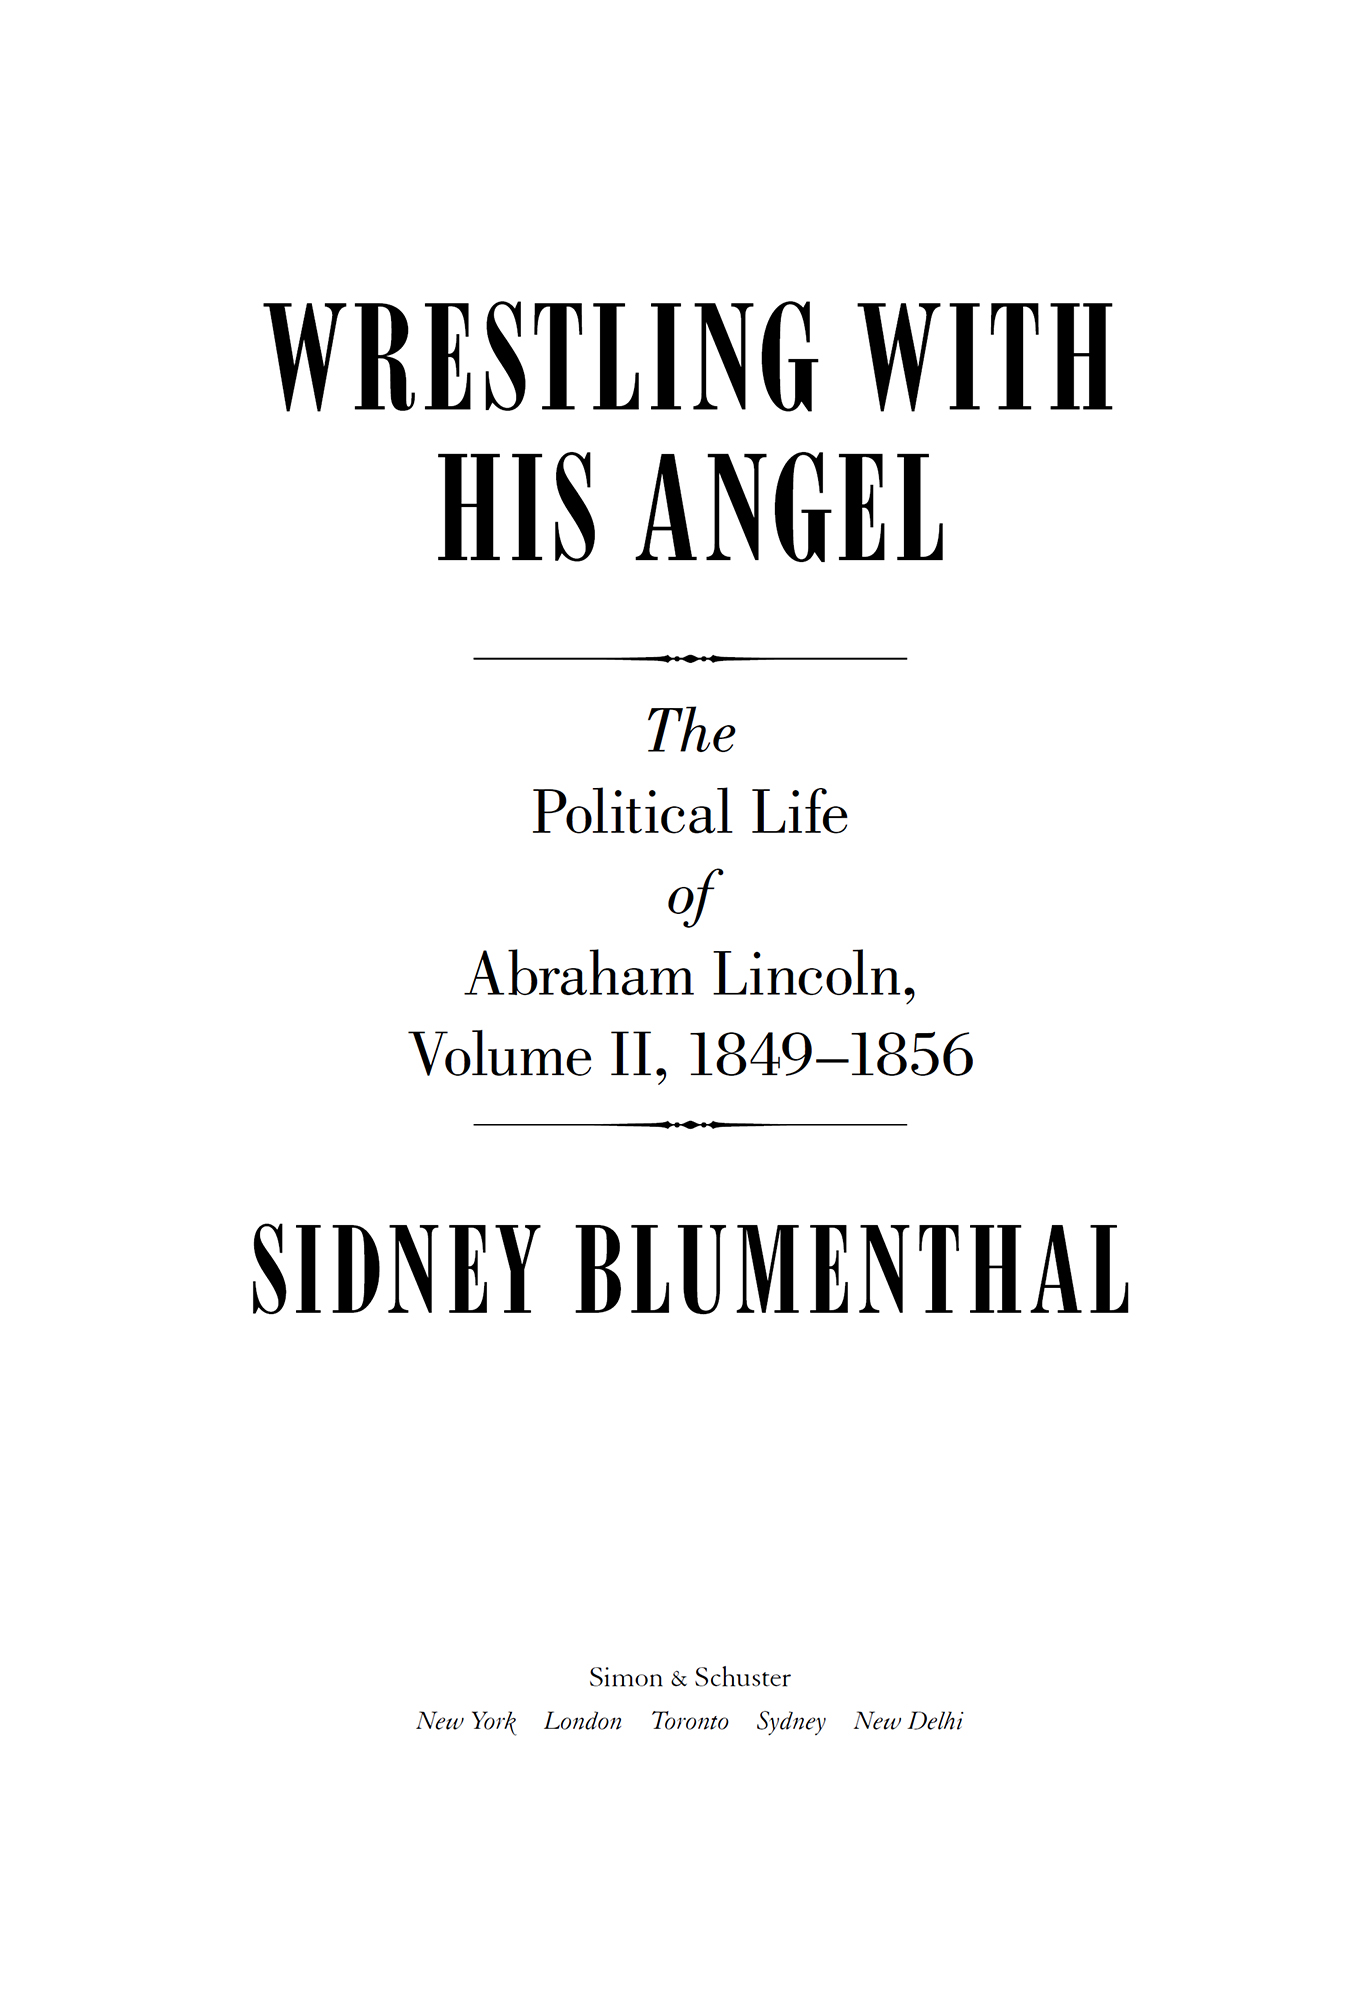 A LSO BY S IDNEY B LUMENTHAL A Self-Made Man The Political Life of Abraham - photo 1